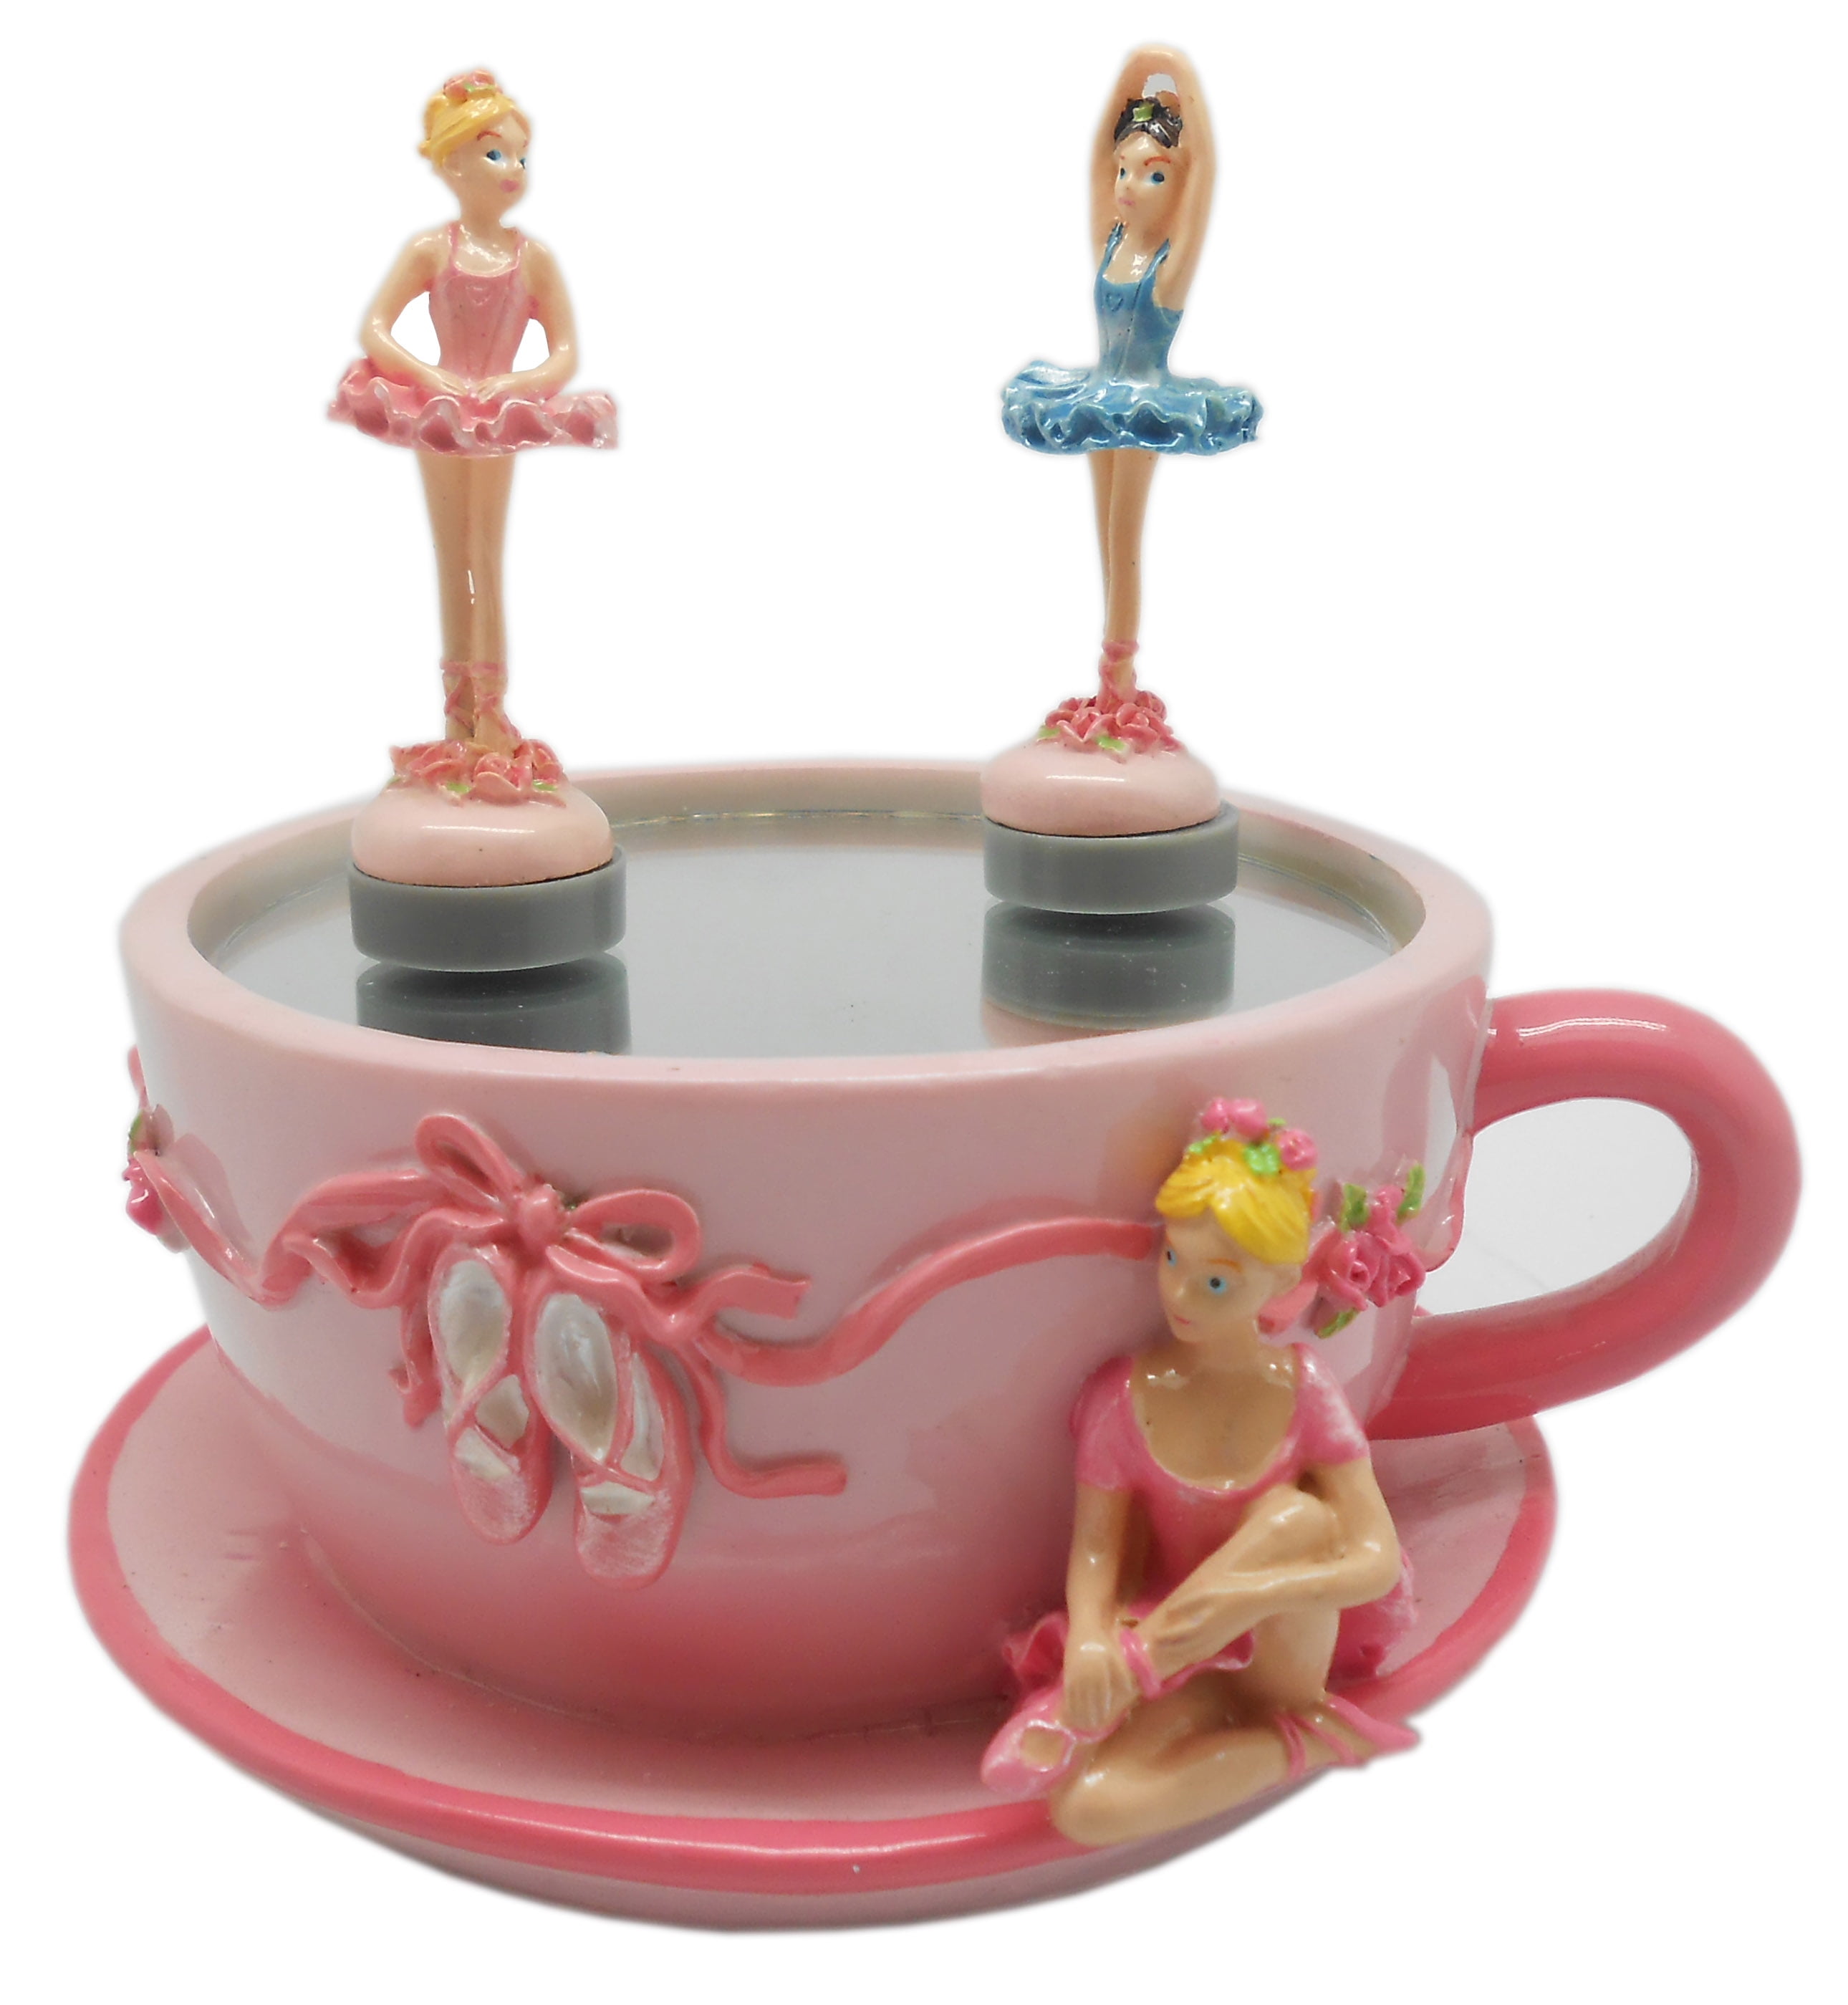 Elegantoss Poly resin Skating Mini Cup Shaped Music Box with Ballerinas Skating On The great gift - Walmart.com